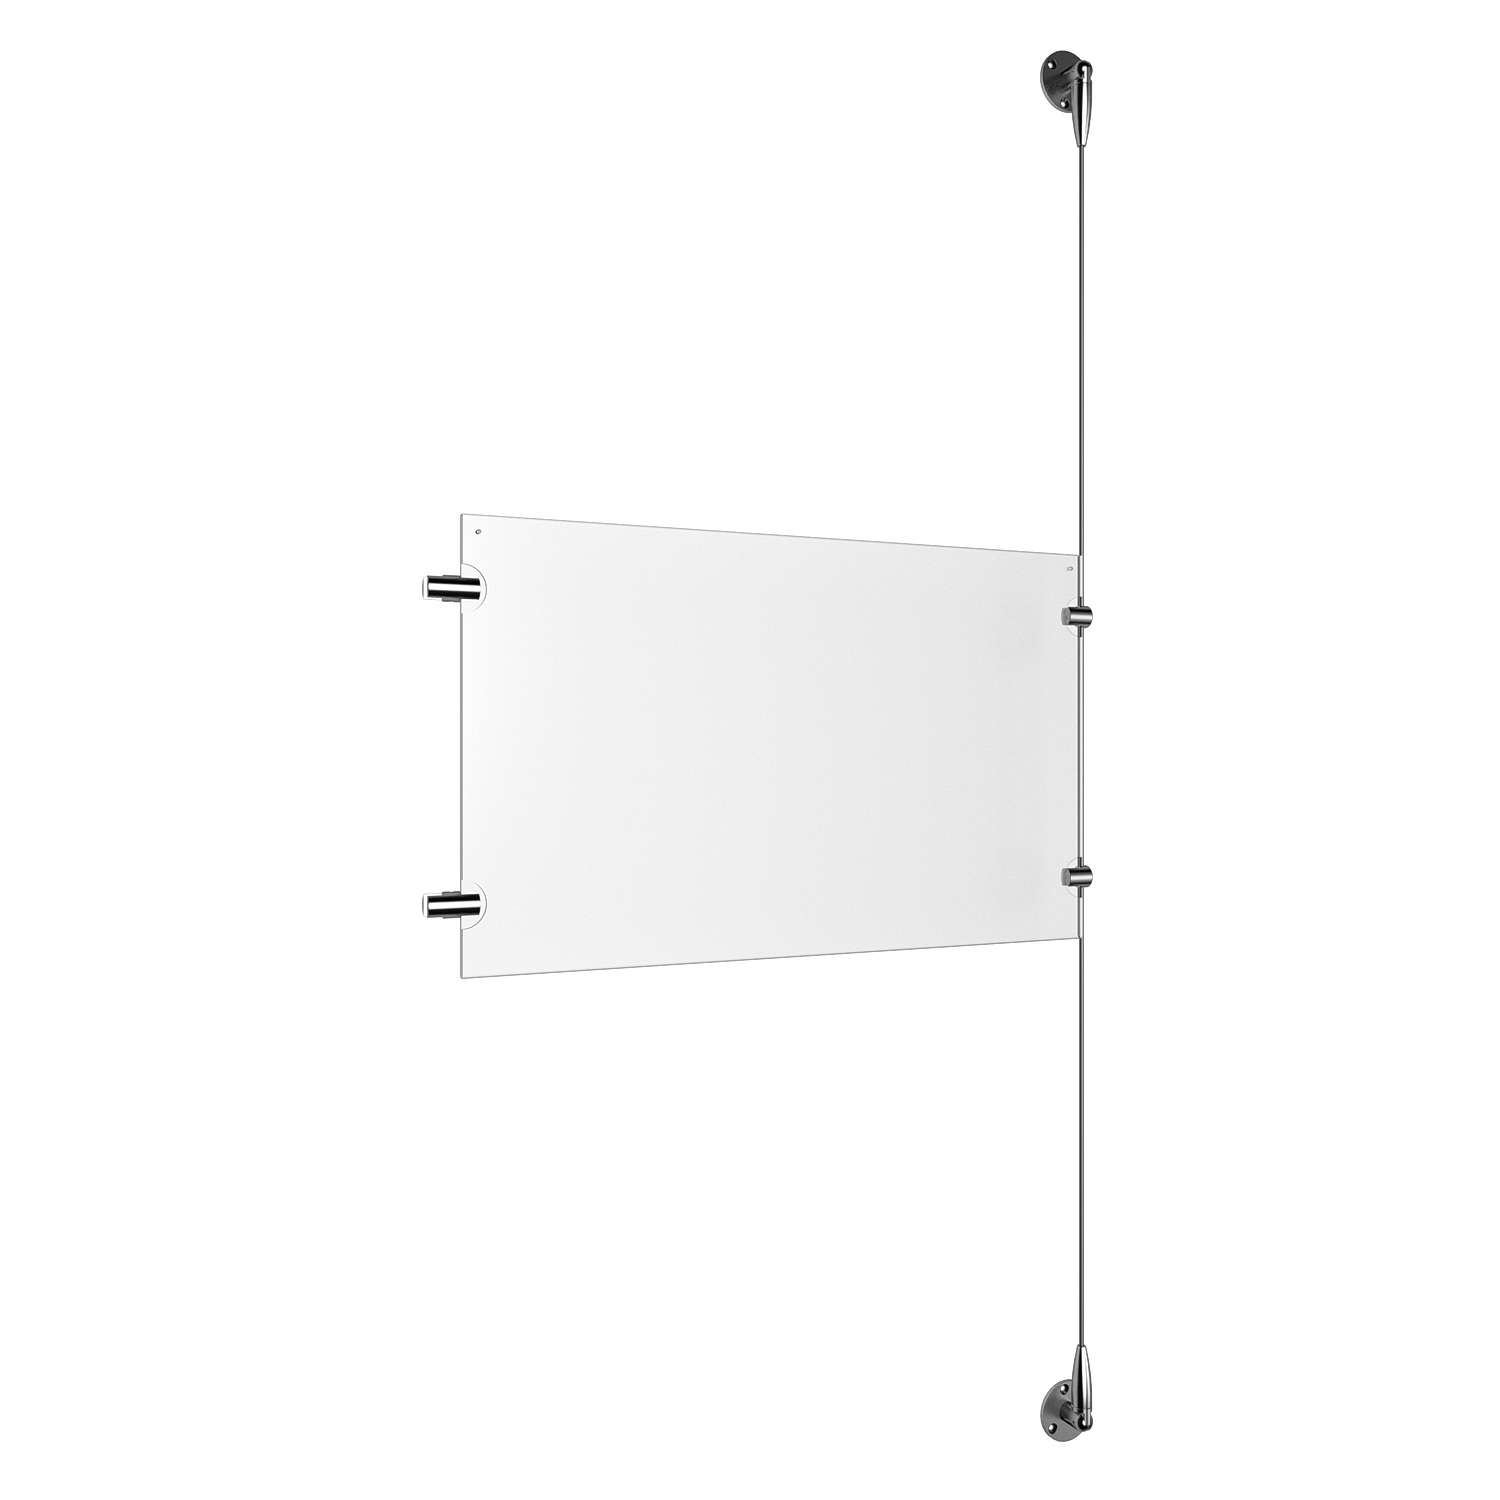 (1) 17'' Width x 11'' Height Clear Acrylic Frame & (1) Stainless Steel Satin Brushed Adjustable Angle Signature 1/8'' Cable Systems with (2) Single-Sided Panel Grippers (2) Double-Sided Panel Grippers